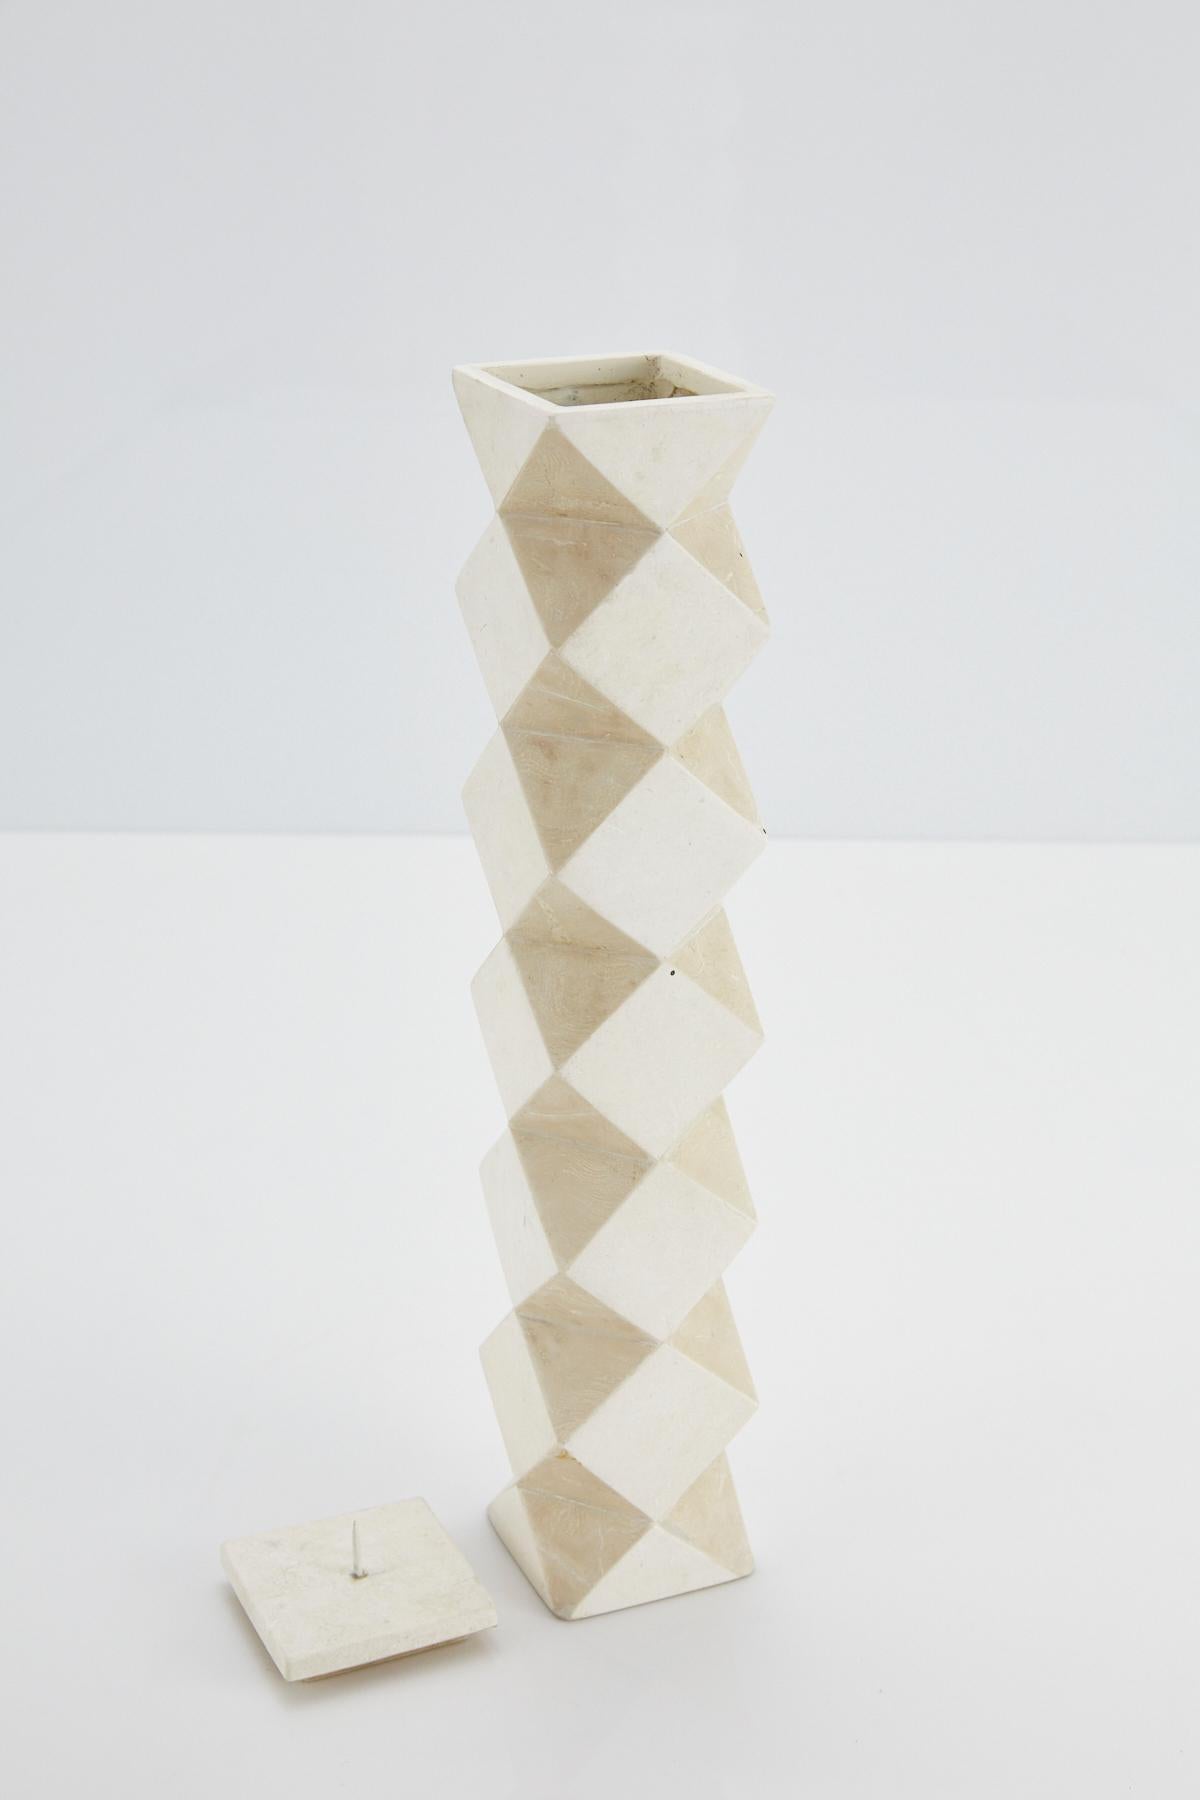 Tall Convertible Faceted Postmodern Tessellated Stone Candlestick or Vase, 1990s (Ende des 20. Jahrhunderts) im Angebot